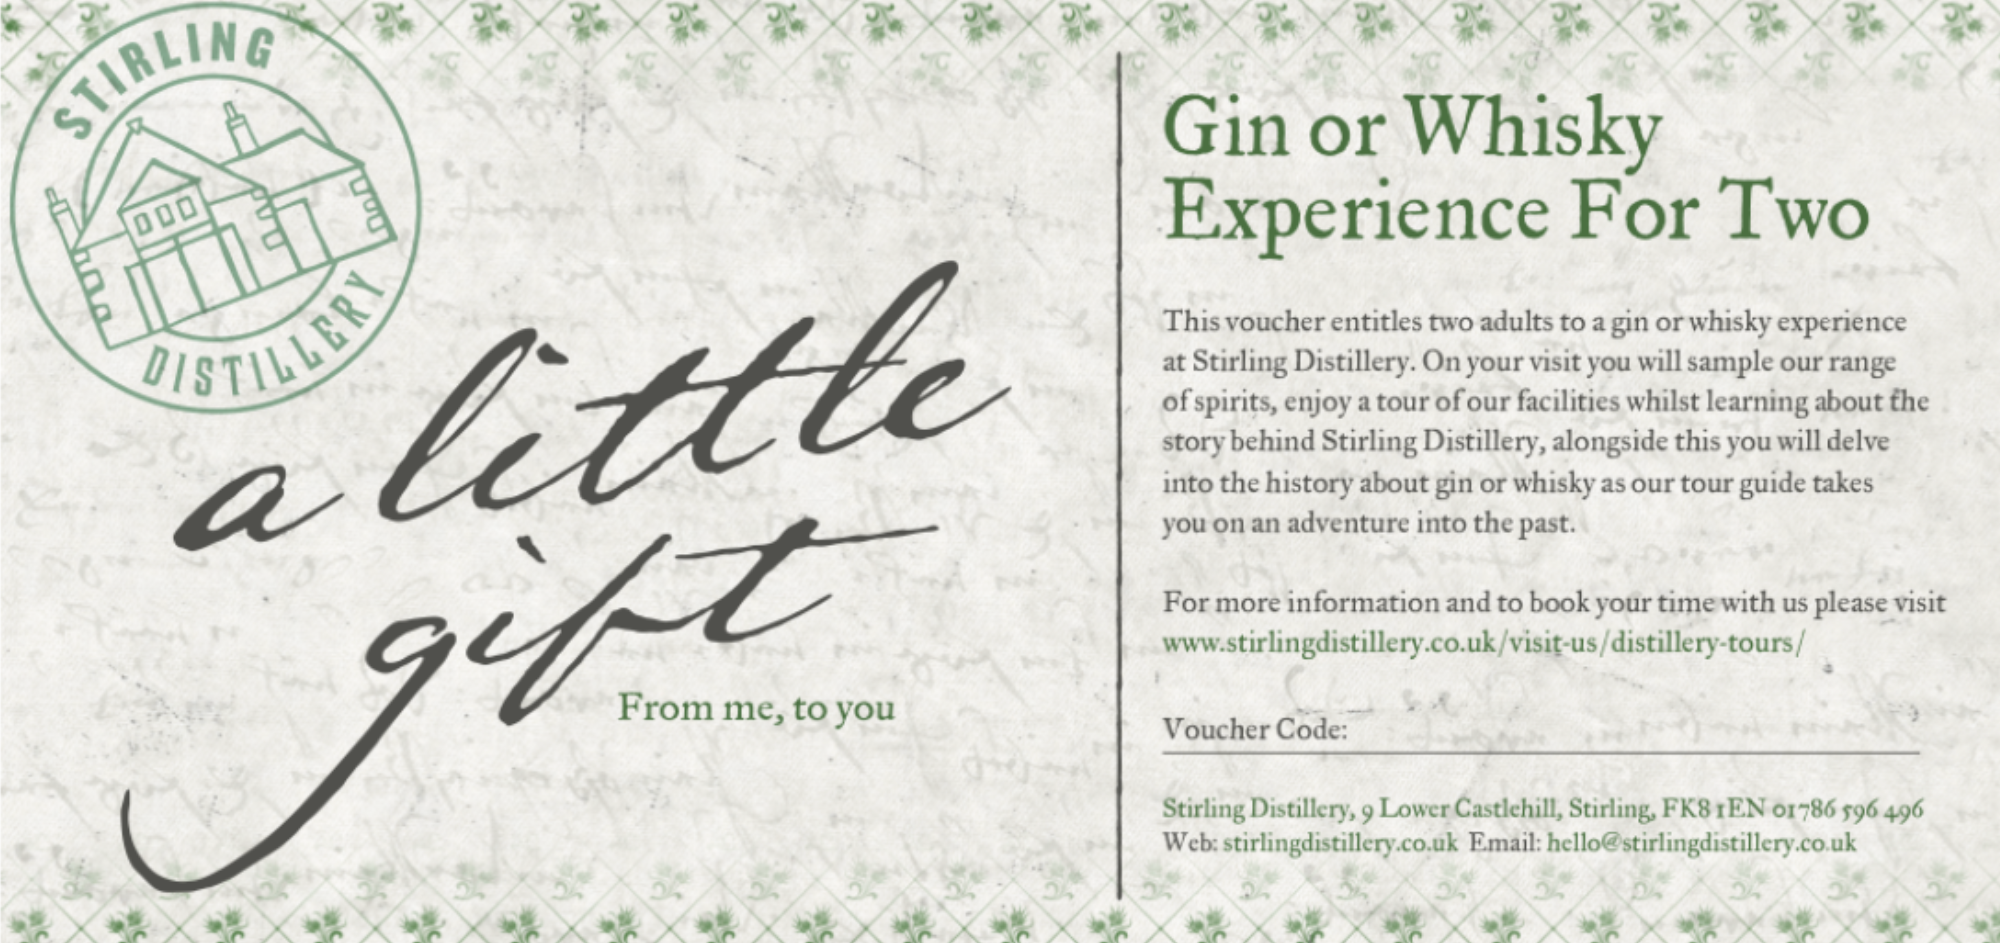 Gin or Whisky Experience For Two Voucher